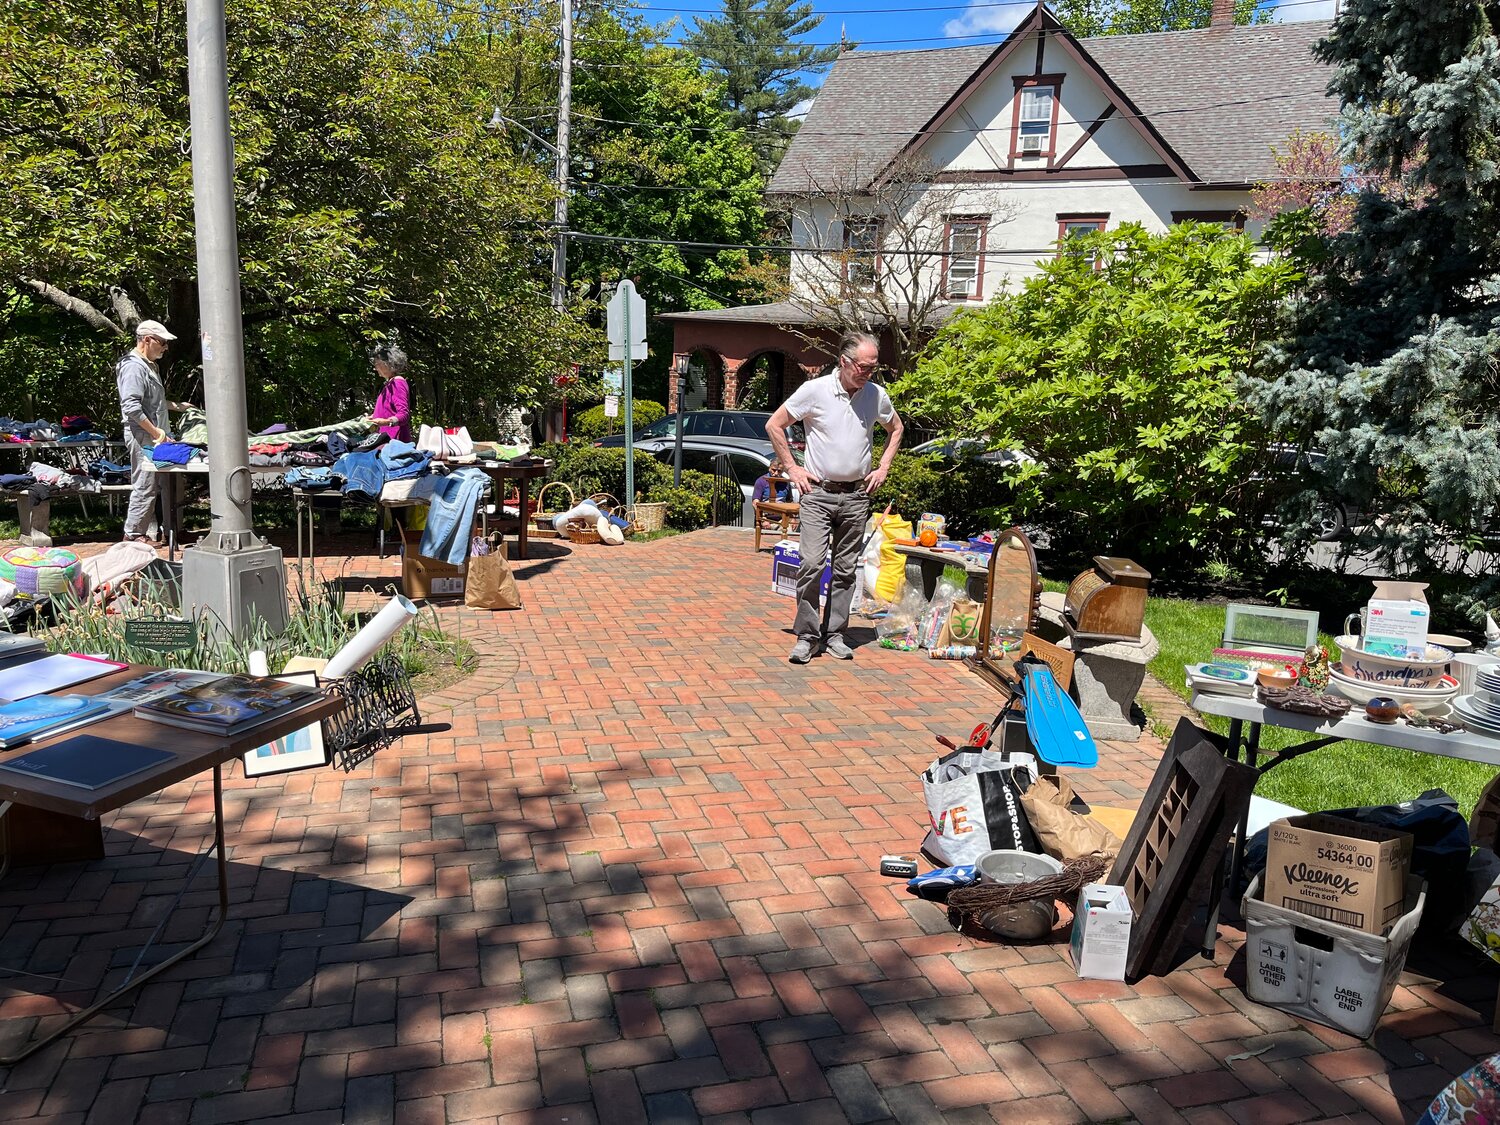 Sea Cliff residents stopped by Offbeat Artifacts throughout the course of the day on May 6.